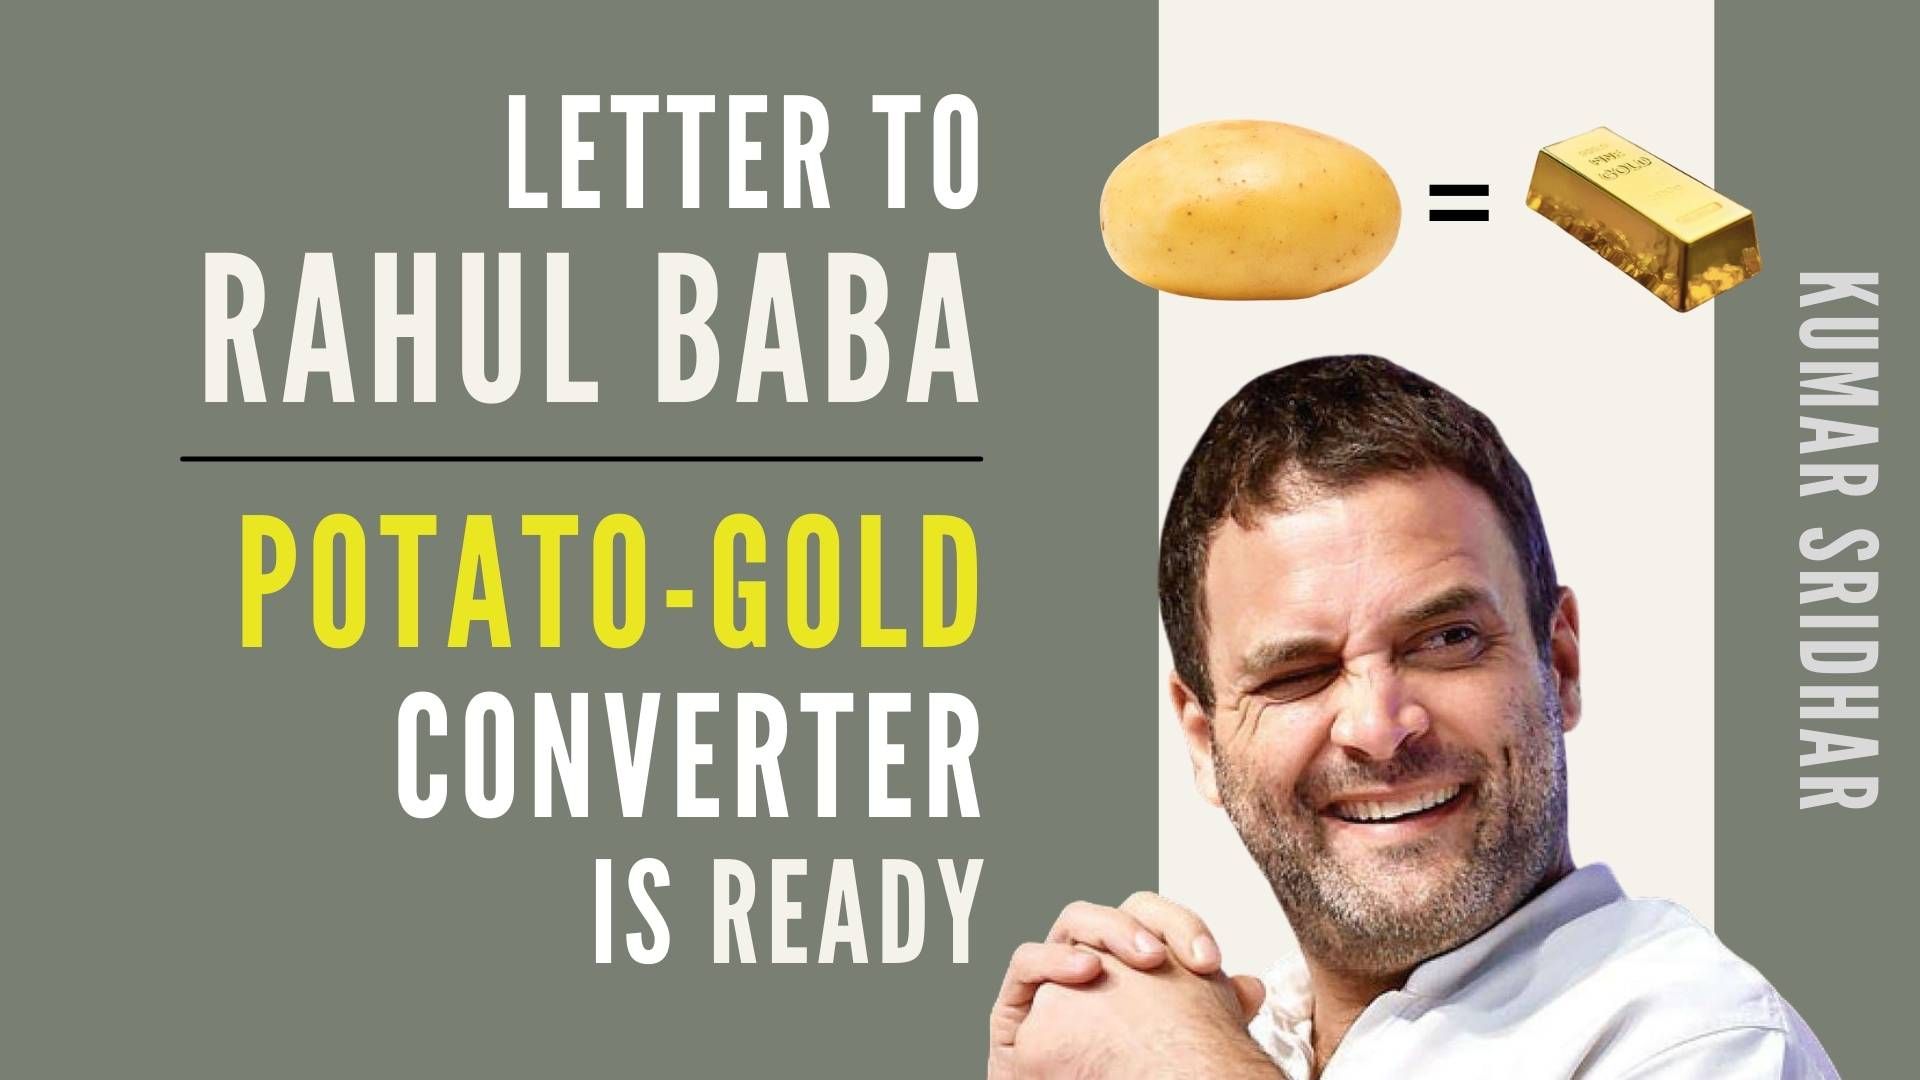 You’re a genius, Rahul Baba! Converting what’s ₹10/ kilogram to something that is over ₹5,000,000/ kilogram is brilliant.